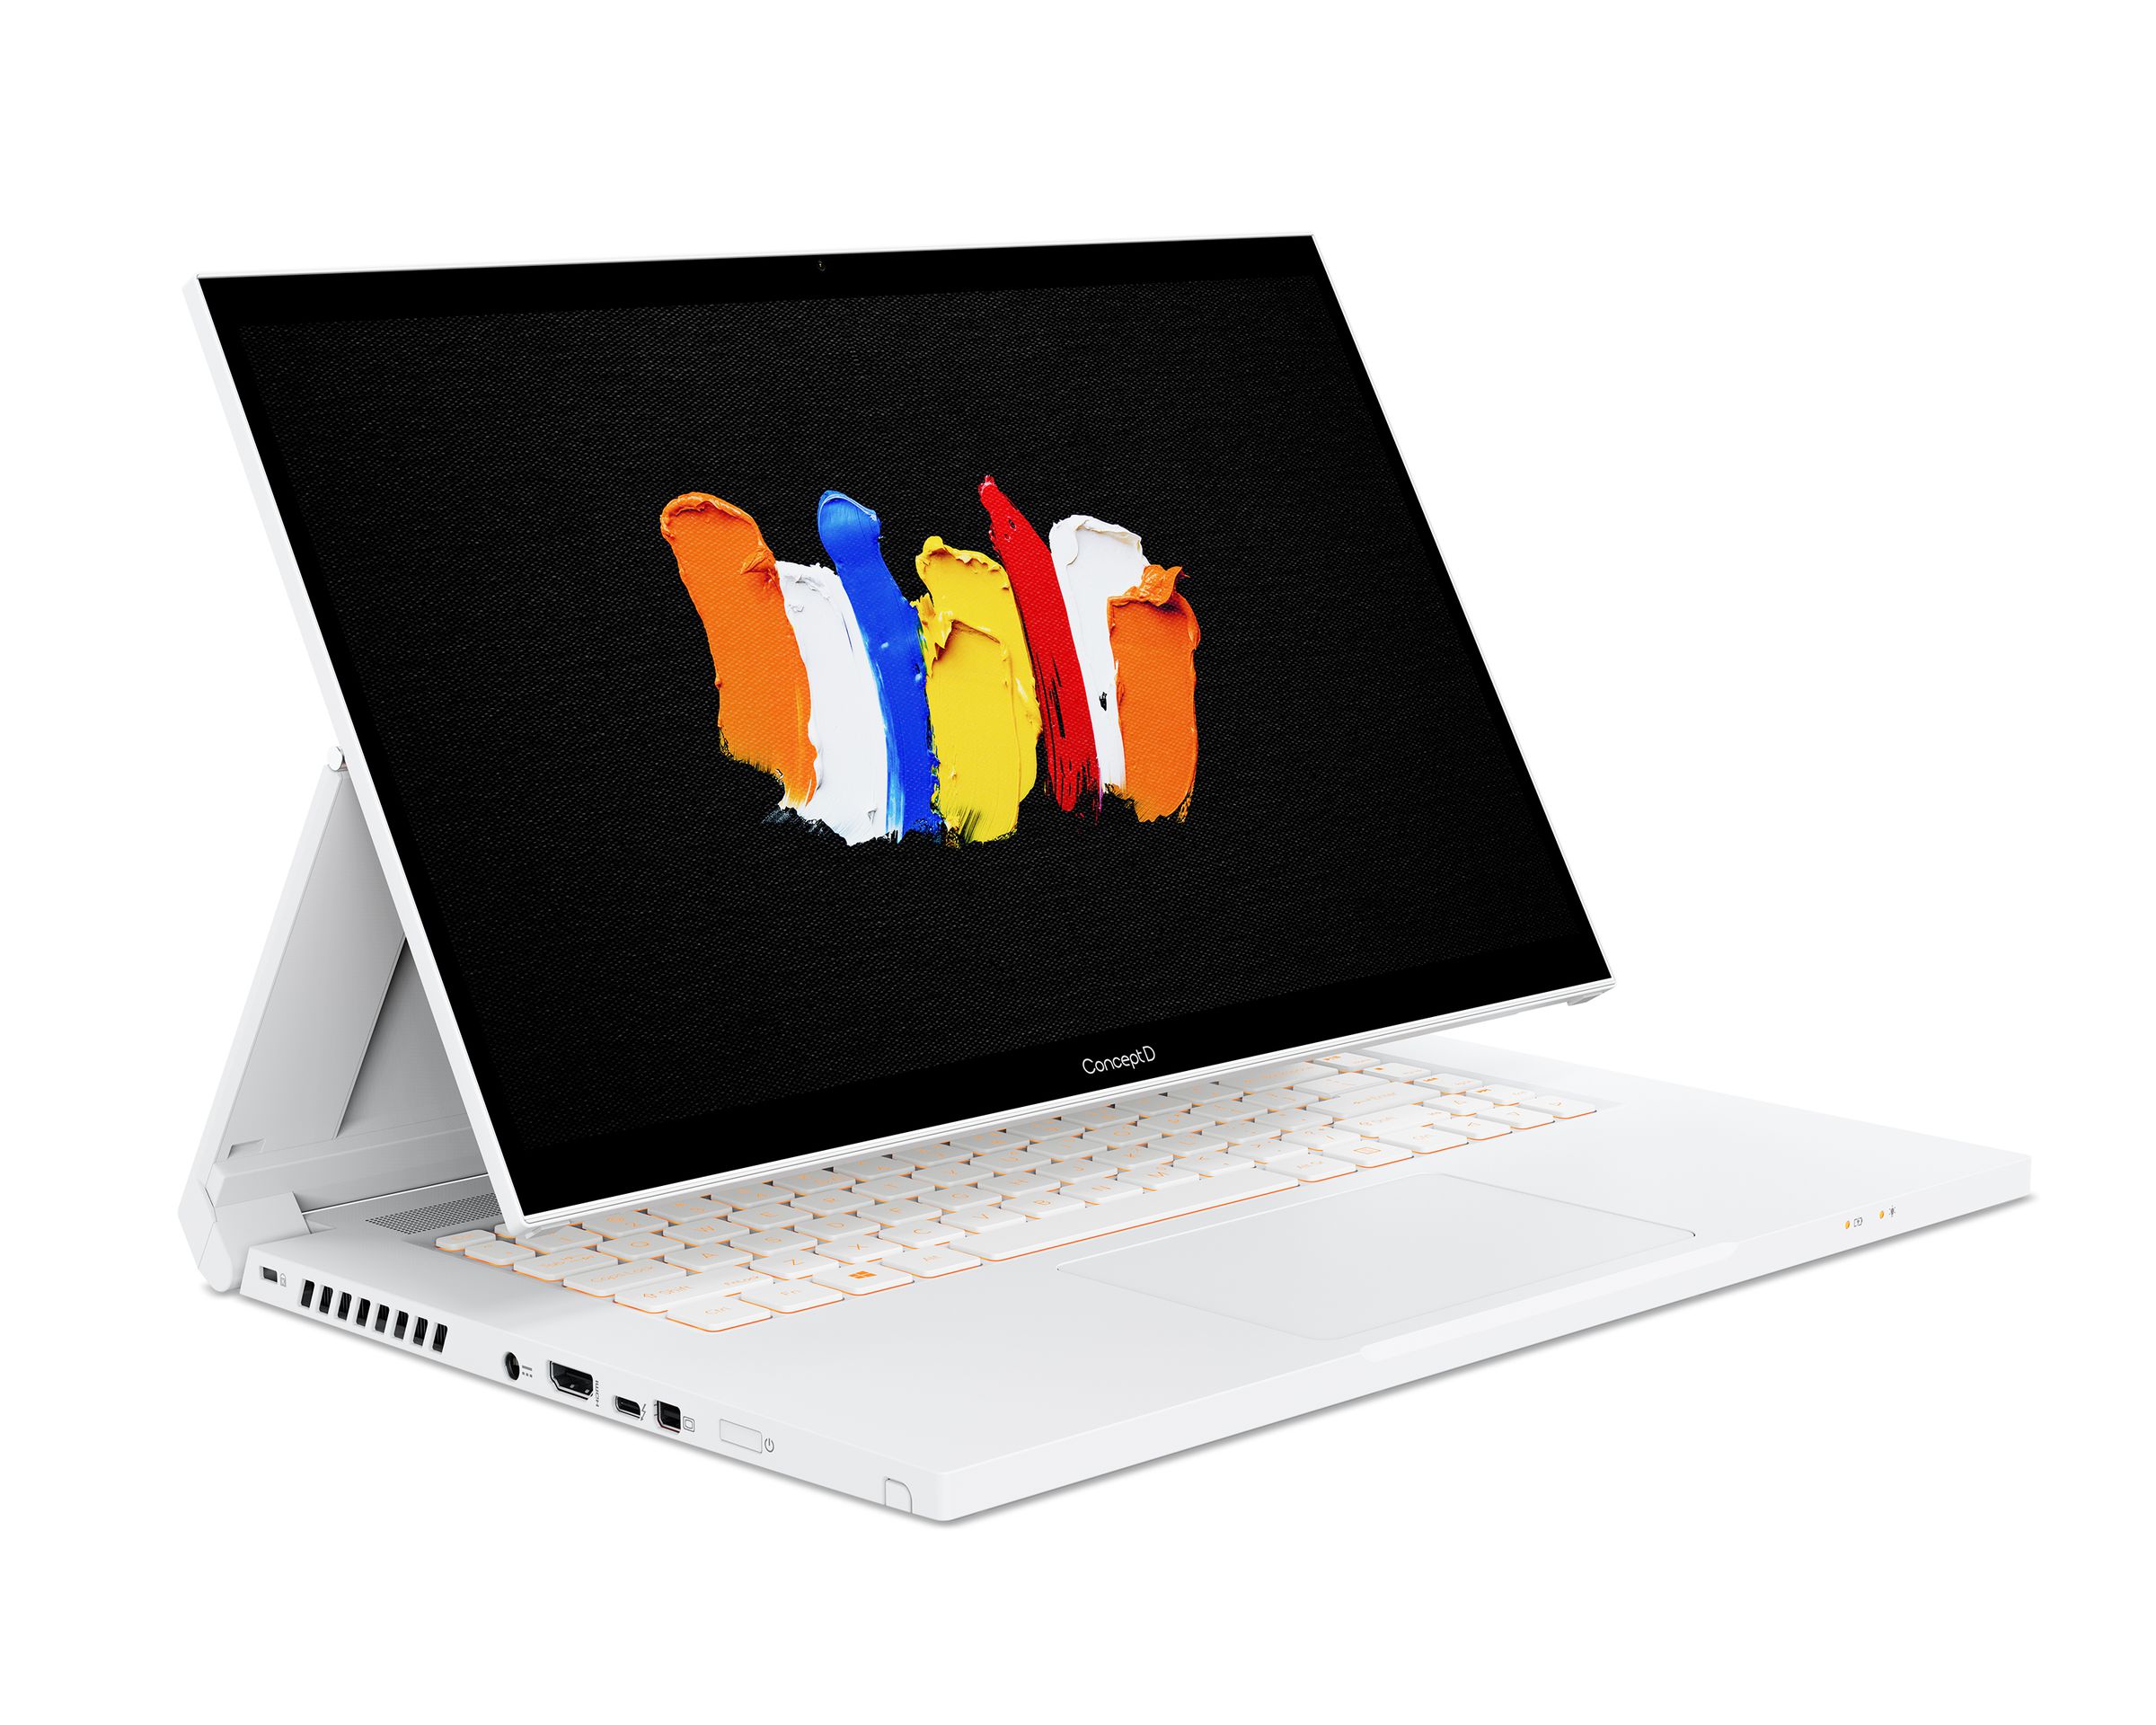 Acer ConceptD 3 Ezel 15.6-inch laptop on a white background